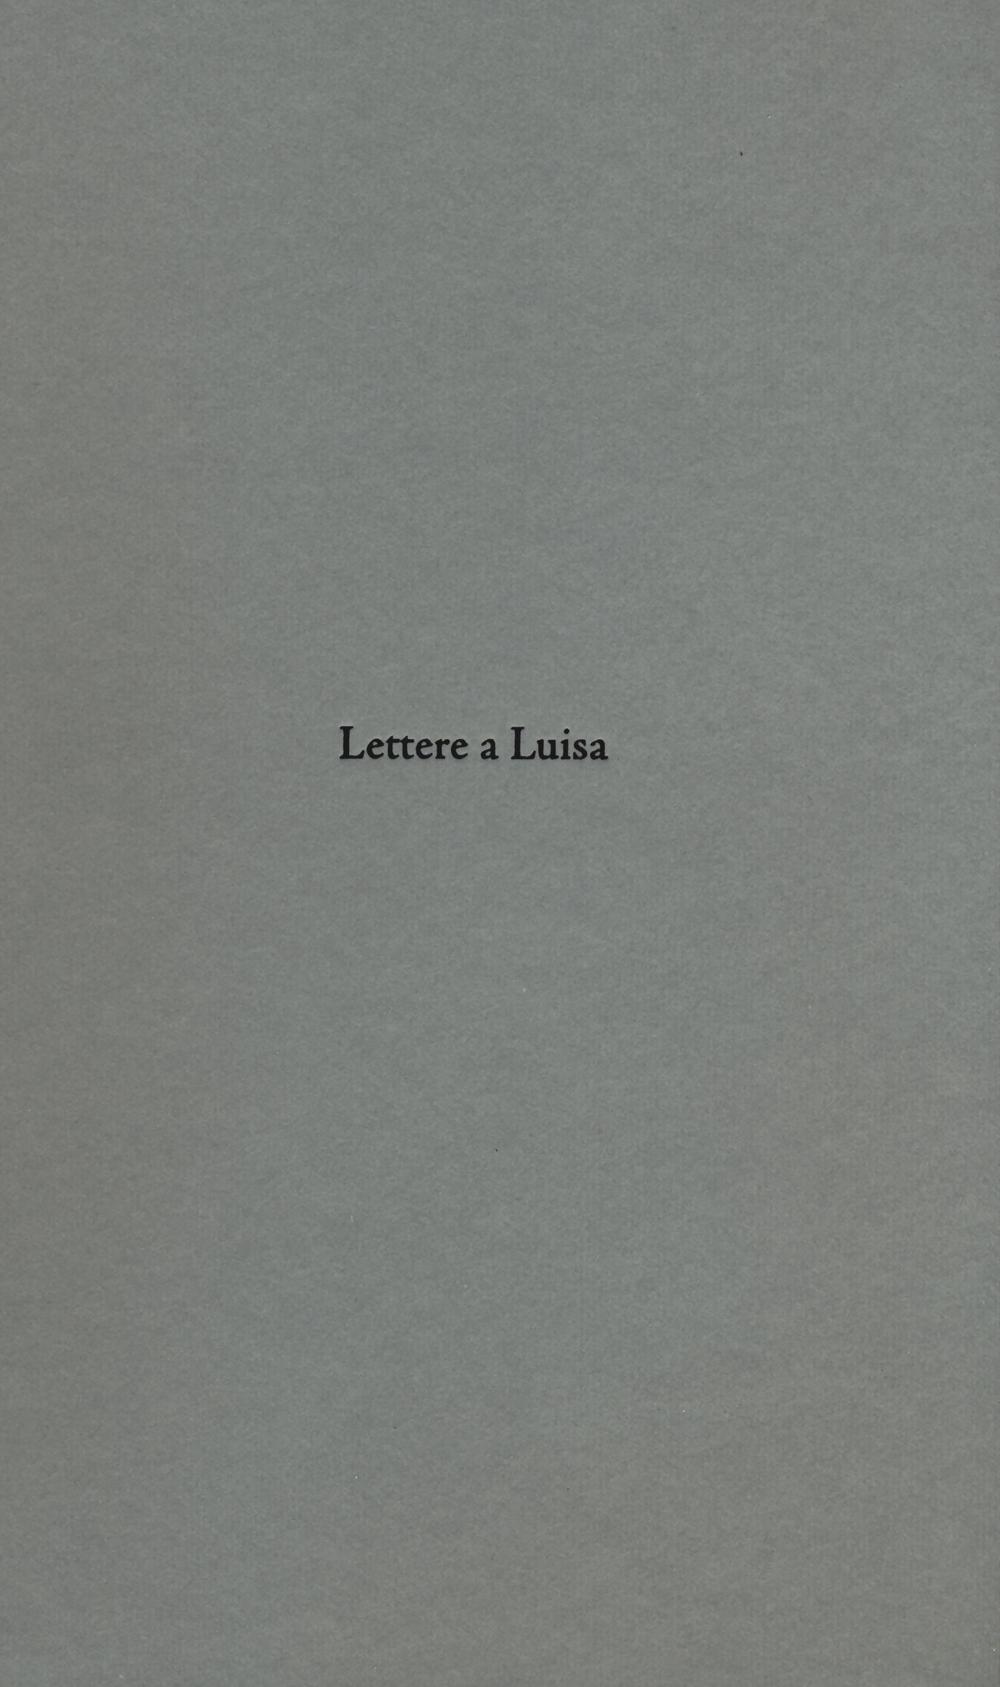 Lettere a Luisa